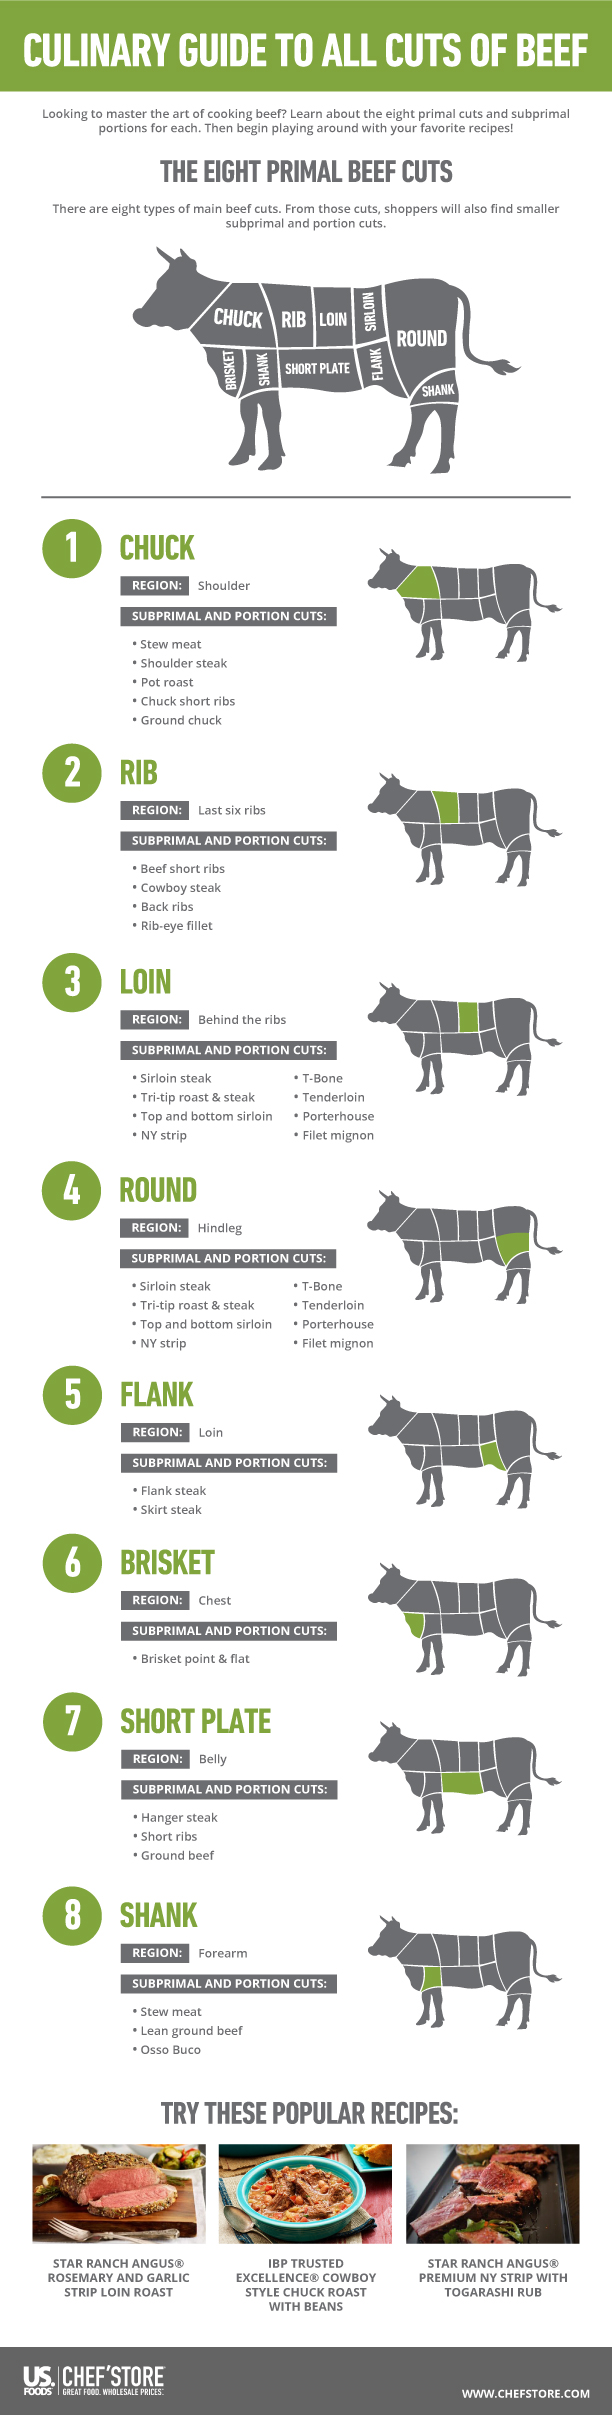 Culinary guide to all cuts of beef.